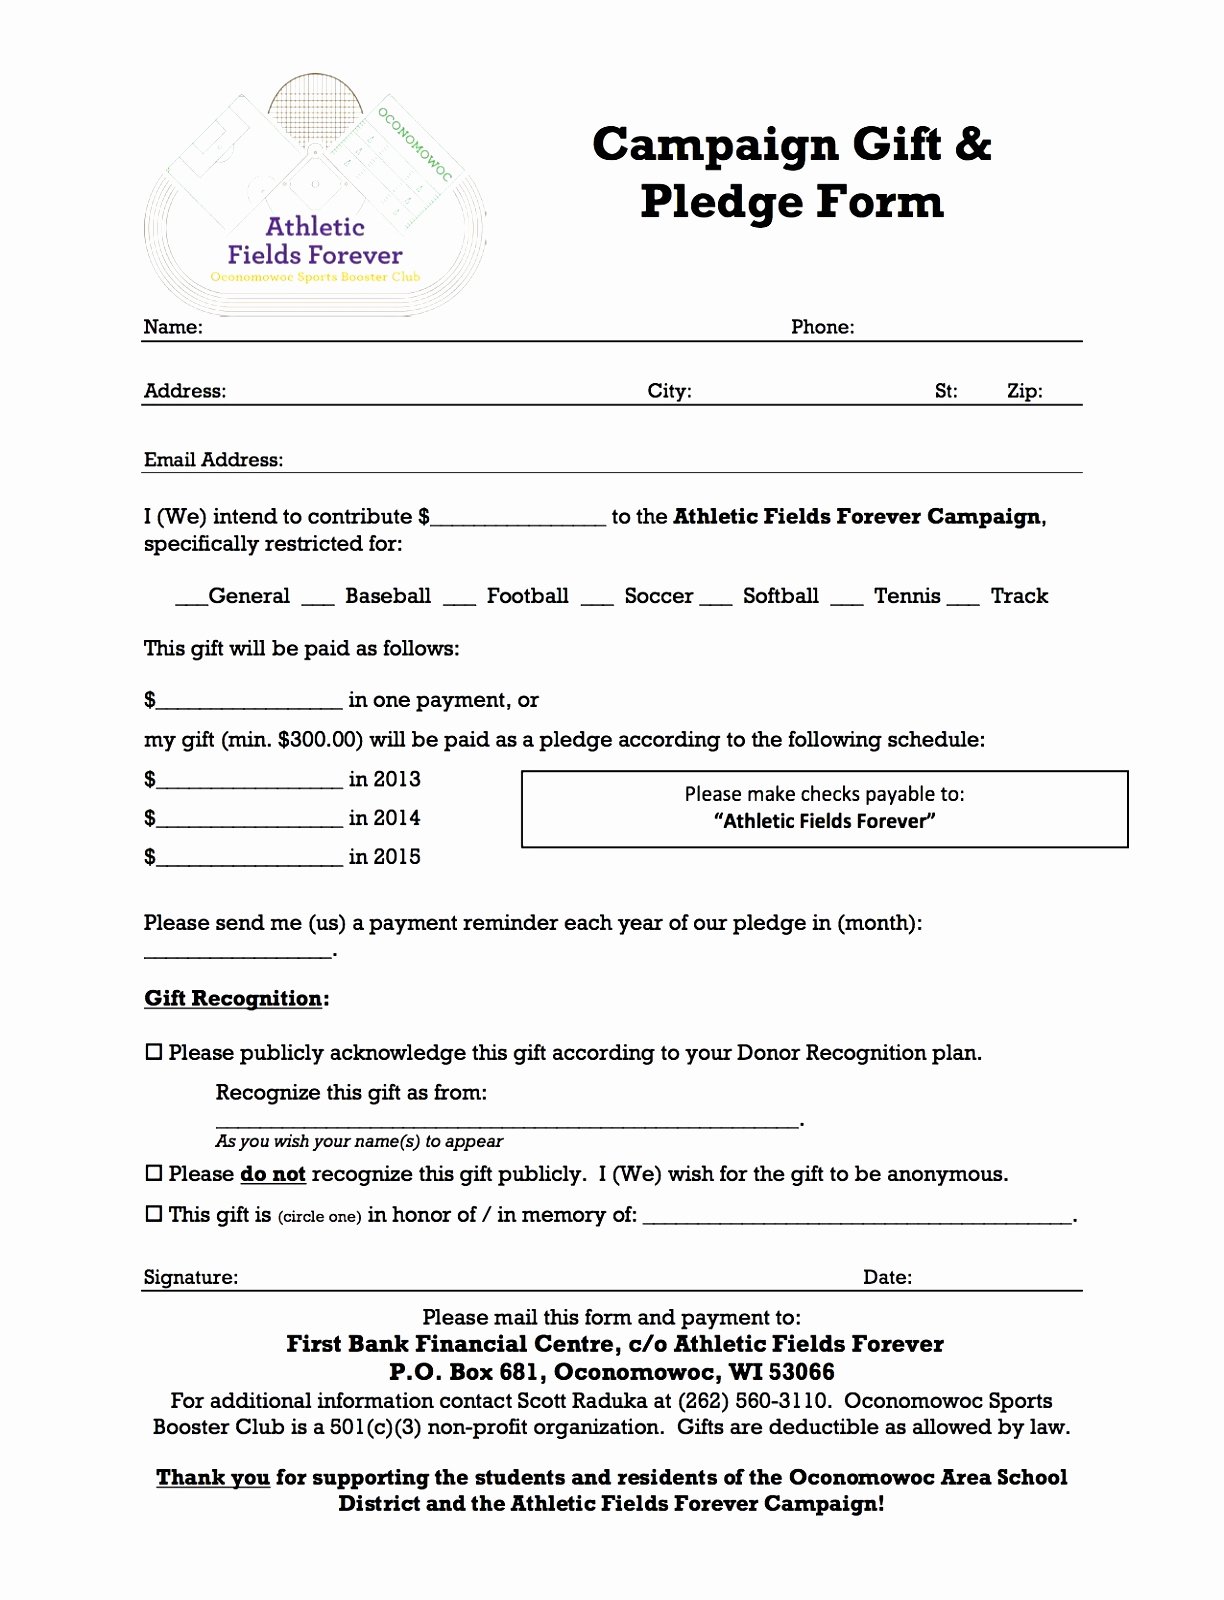 Donor Pledge Card Template Best Of 9 Charity Pledge form Template Dtauw